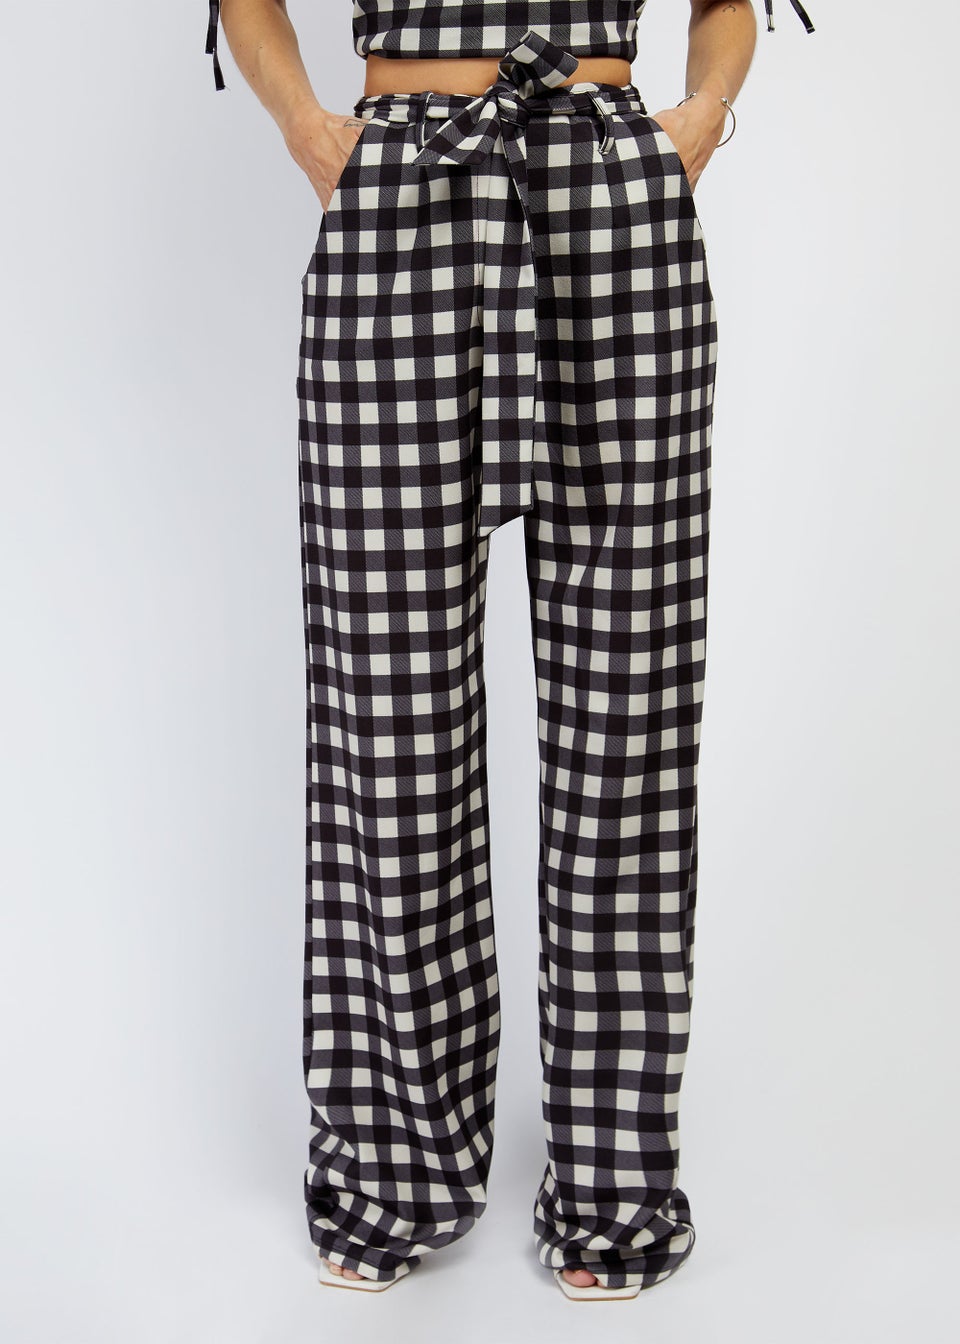 Girls on Film by Dani Dyer Black Gingham Co-Ord Trousers